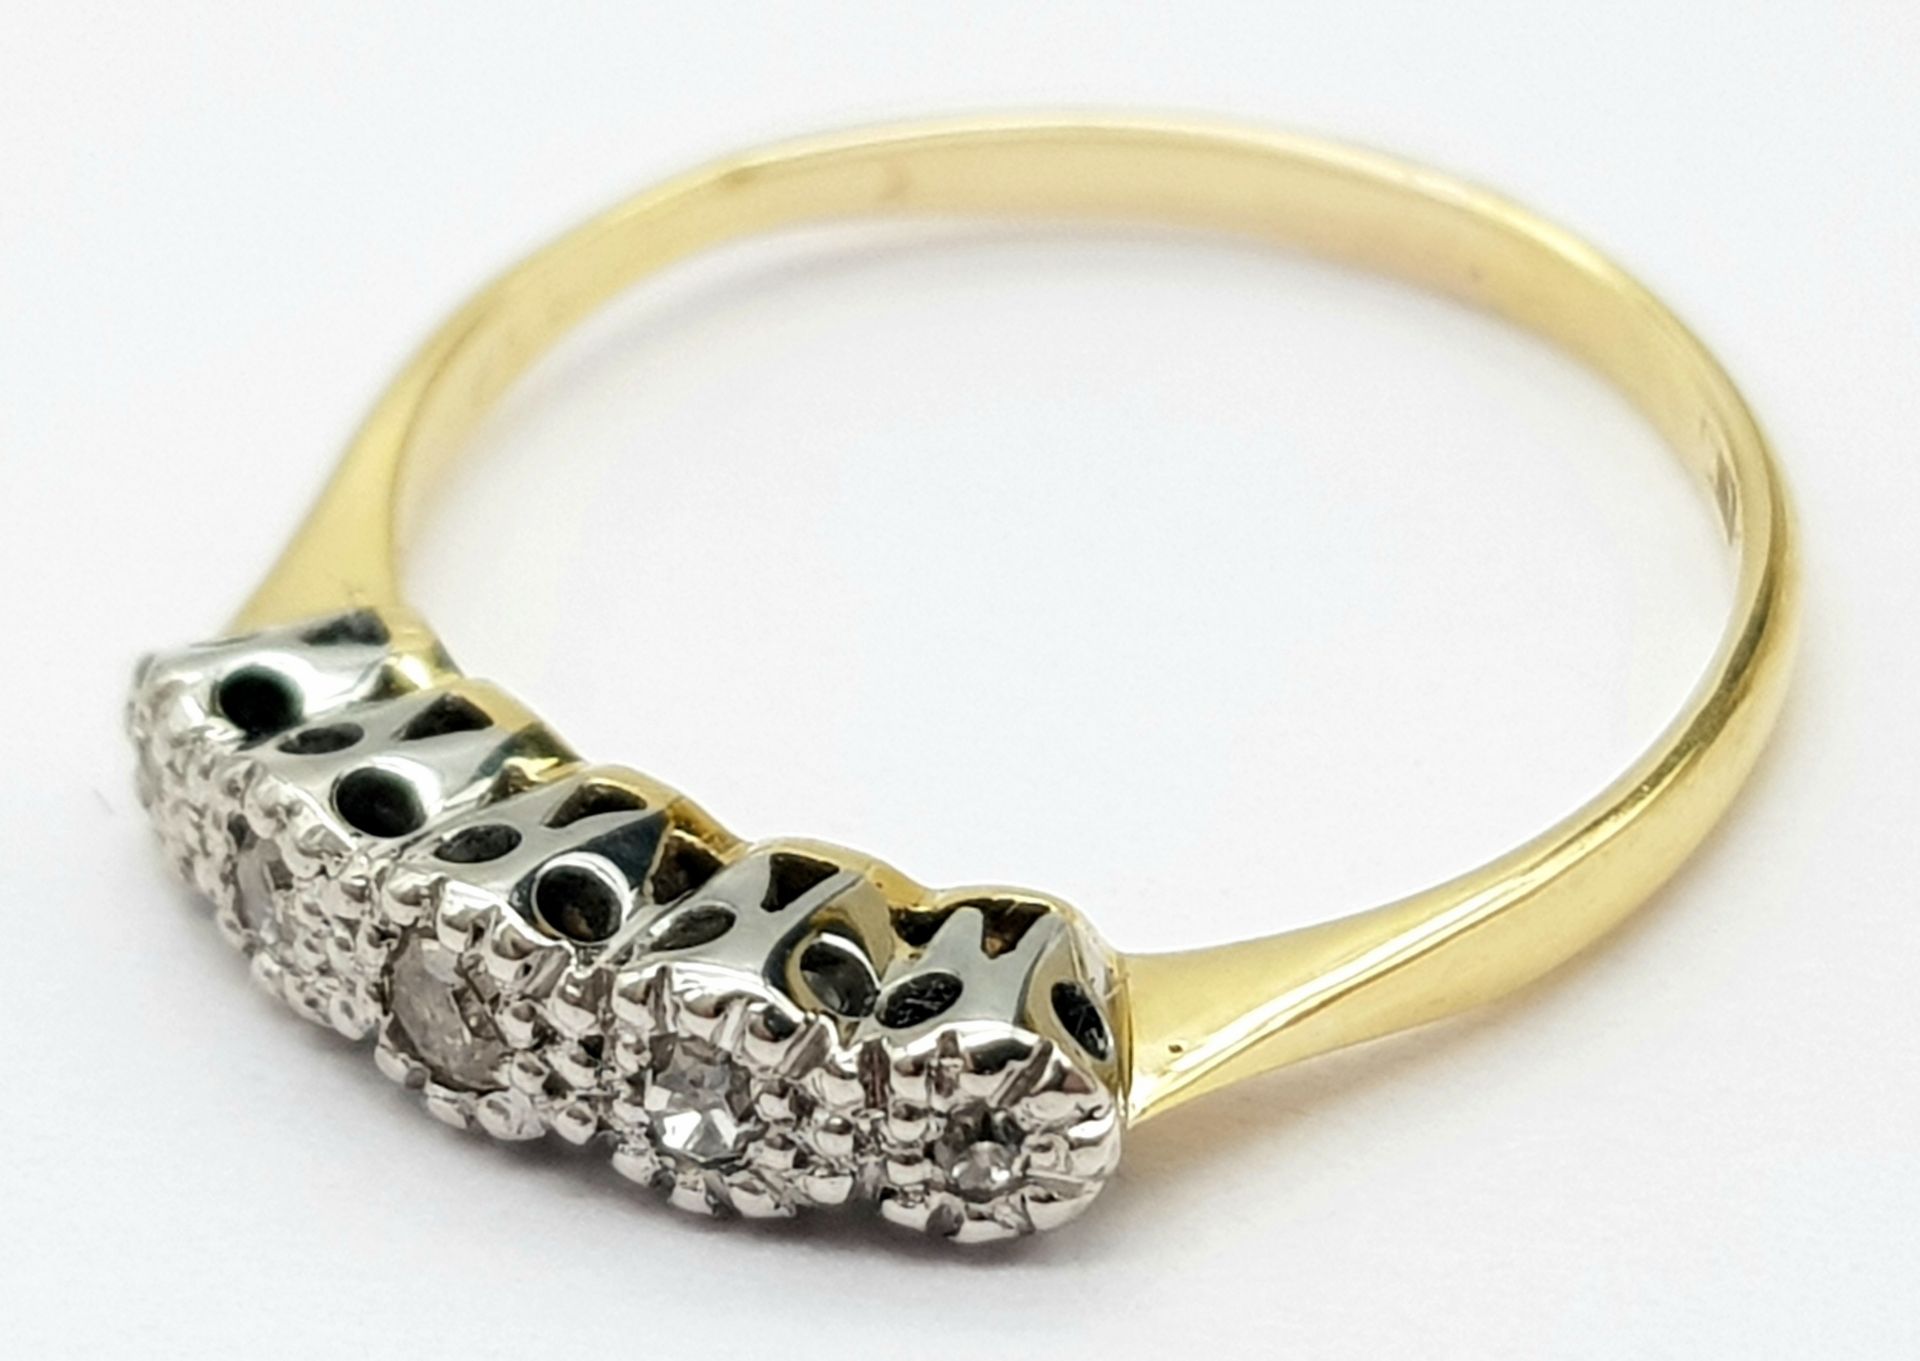 AN 18K YELLOW GOLD VINTAGE DIAMOND 5 STONE RING, Size J, 1.6g total weight. Ref: SC 8066 - Image 3 of 5